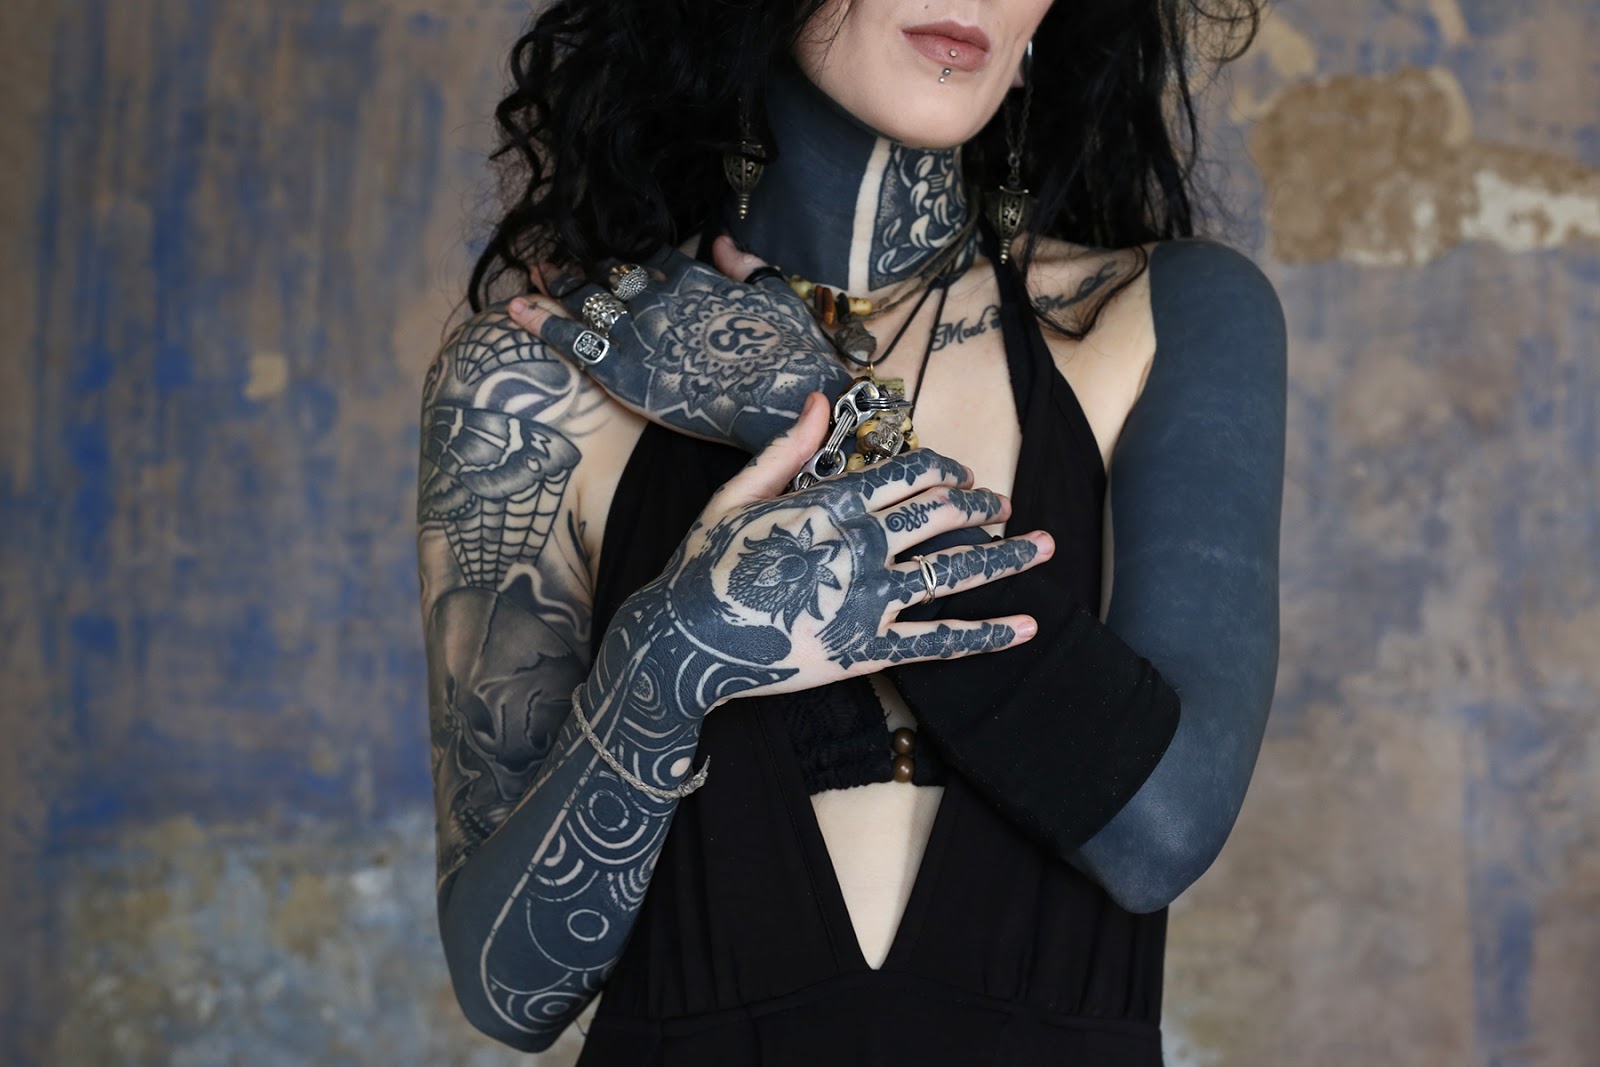 Sophie | Women with Tattoos